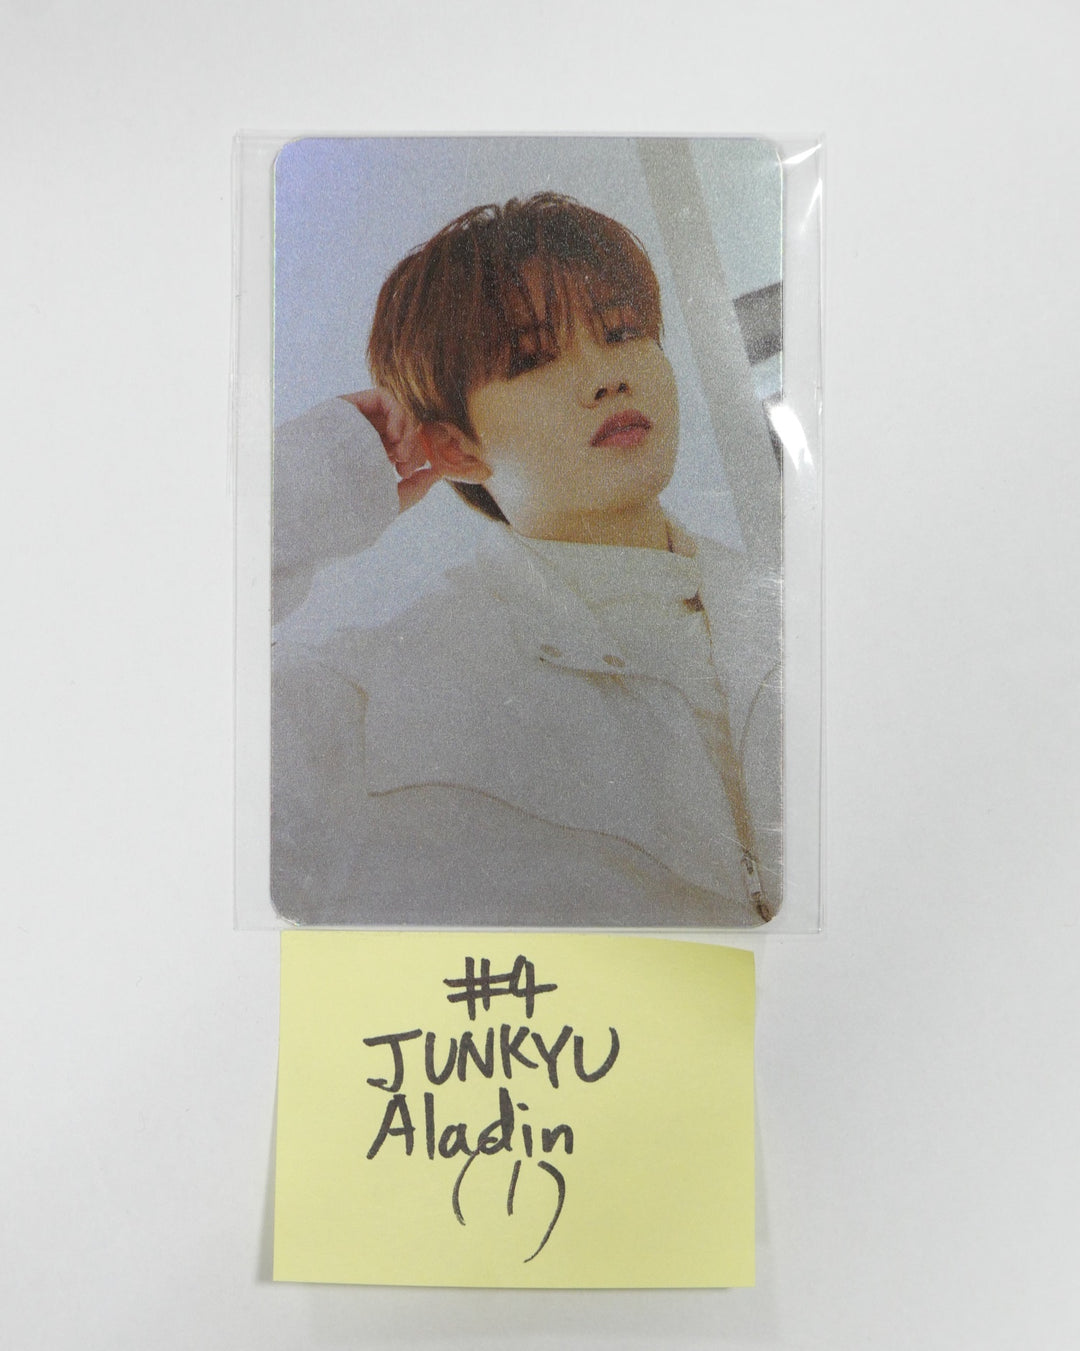 Treasure 'THE SECOND STEP : CHAPTER ONE' - Aladin Pre-Order Benefit Hologram Photocard [Updated 2/18]